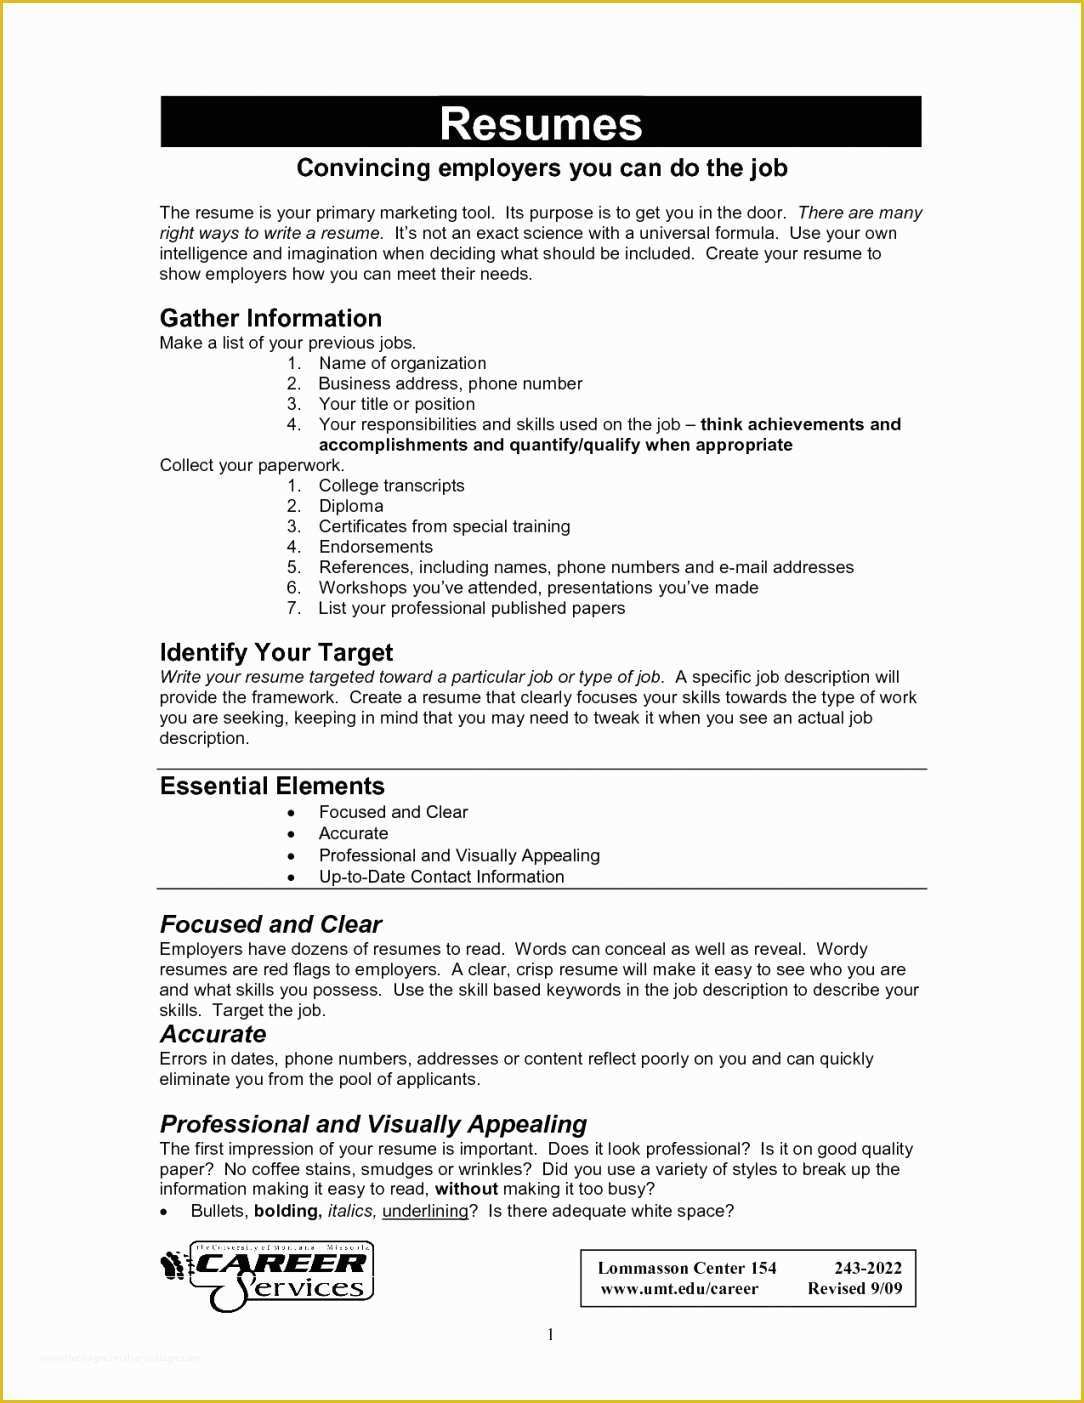 Free Resume Templates for Libreoffice Of Certificate Template Libreoffice Best Resume Elegant